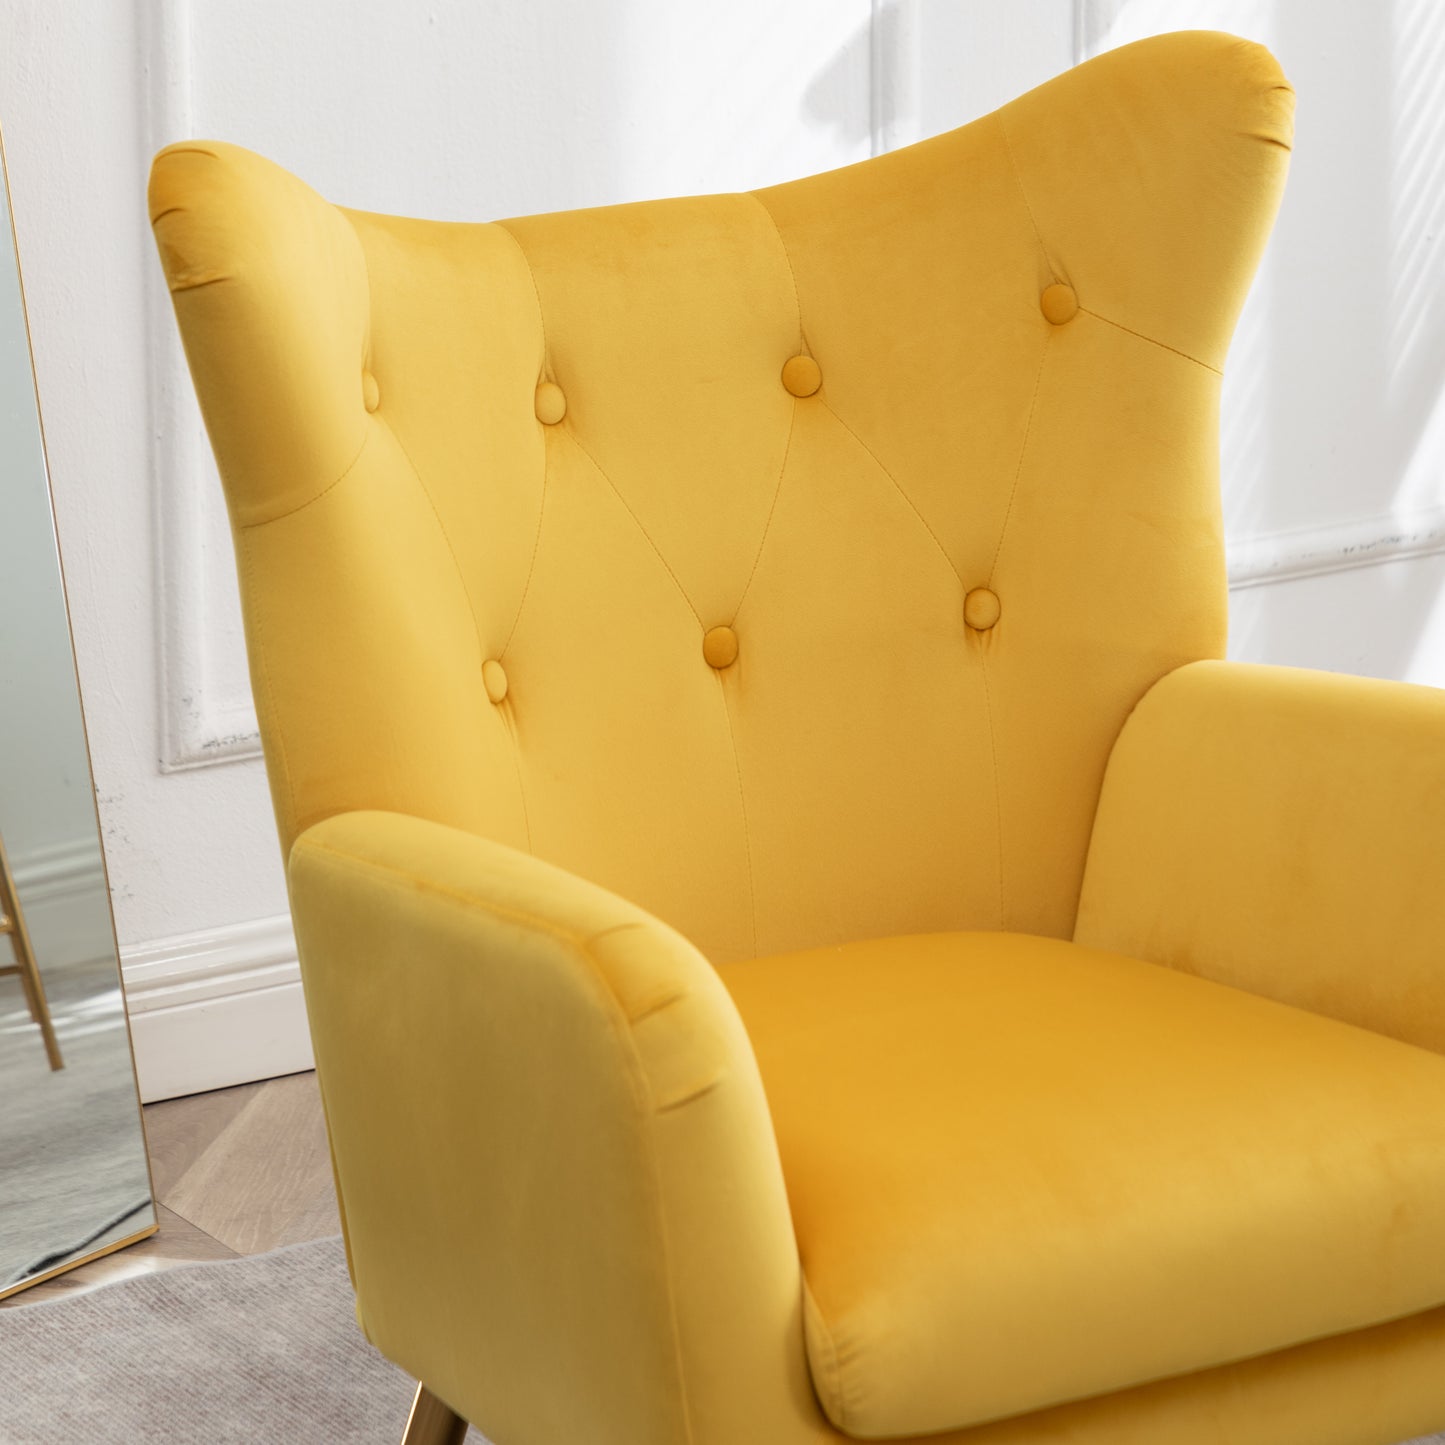 Roundhill Furniture Sovarol Velvet Button-Tufted Wing Back Accent Chair, Yellow